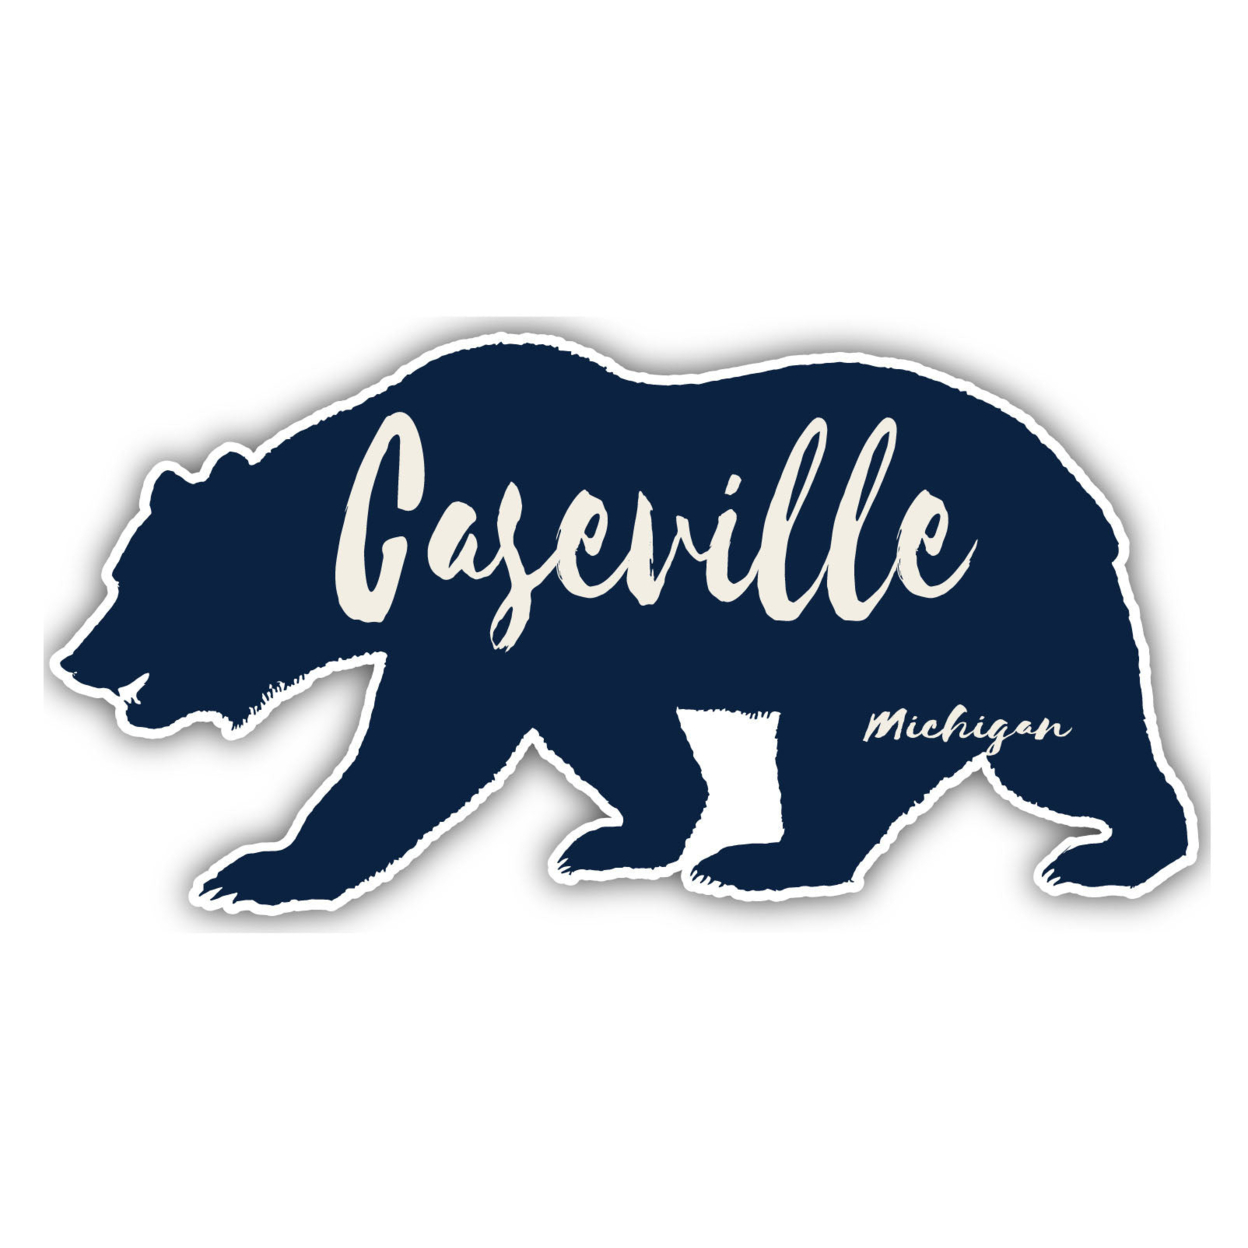 Caseville Michigan Souvenir Decorative Stickers (Choose Theme And Size) - 4-Pack, 8-Inch, Great Outdoors